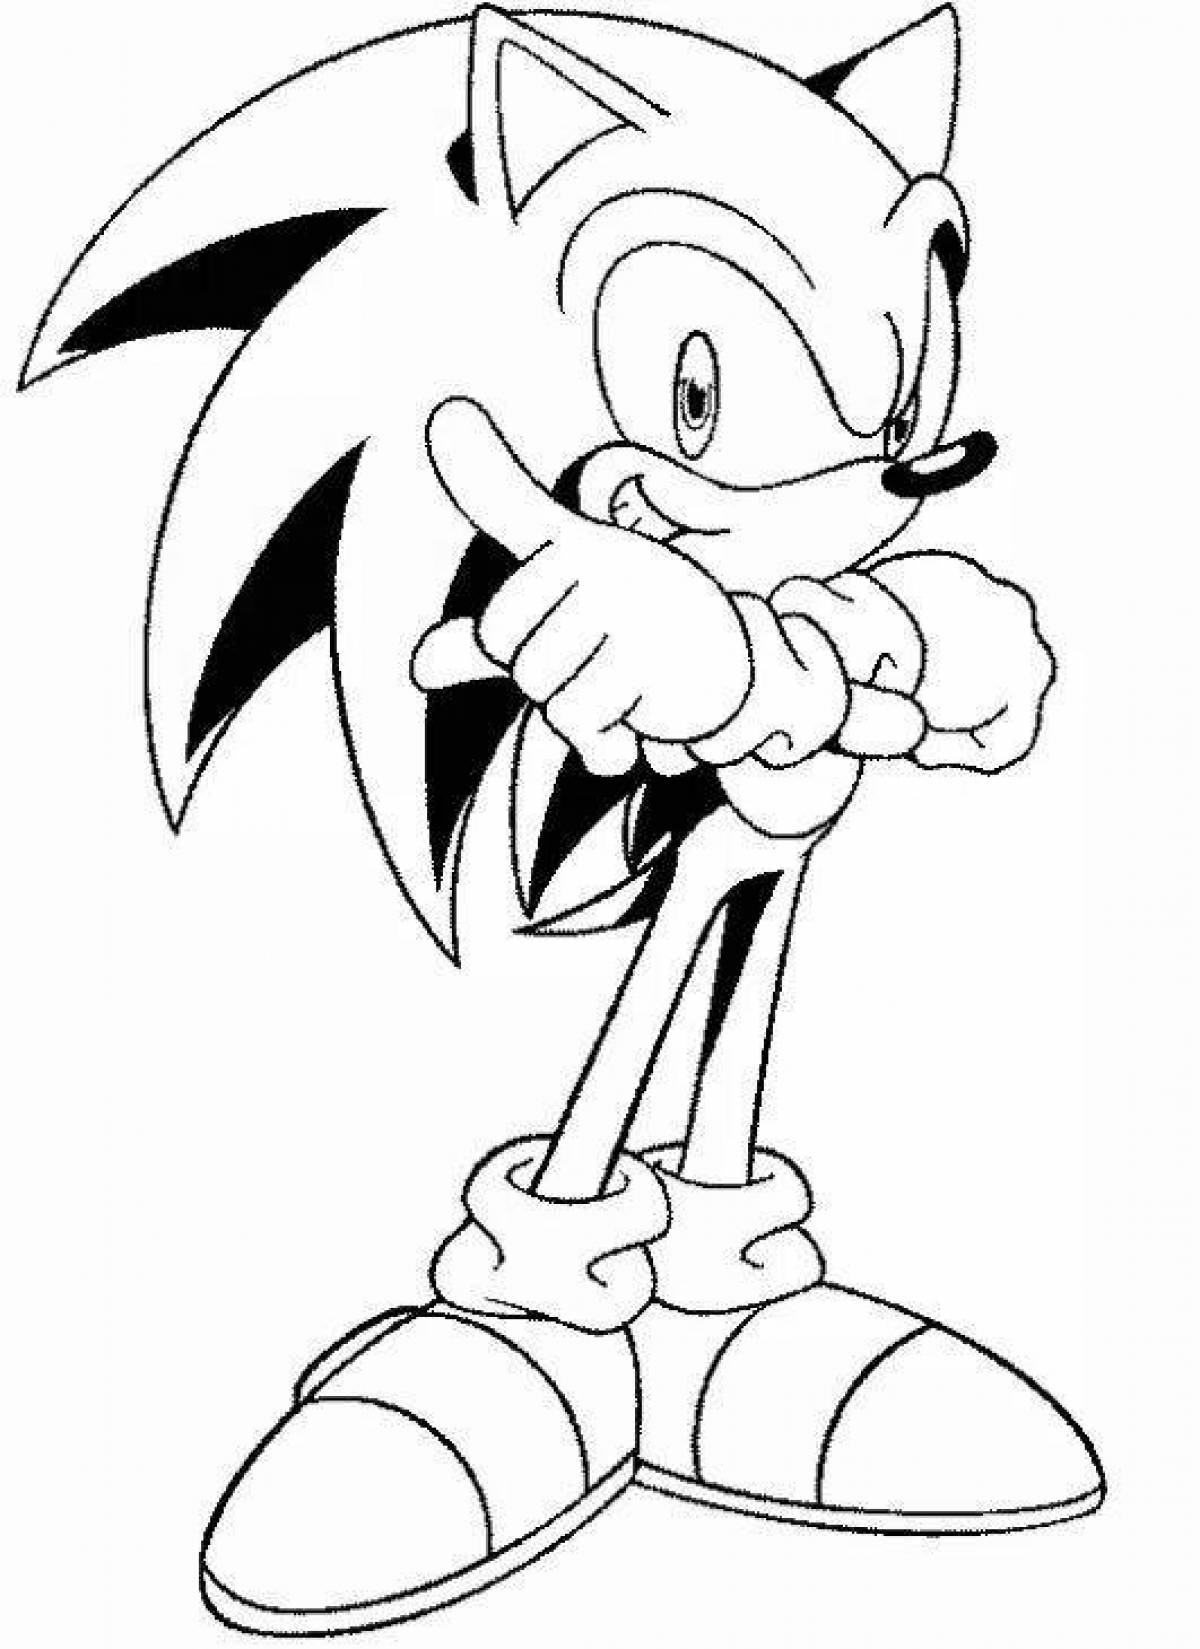 Fun white sonic coloring page